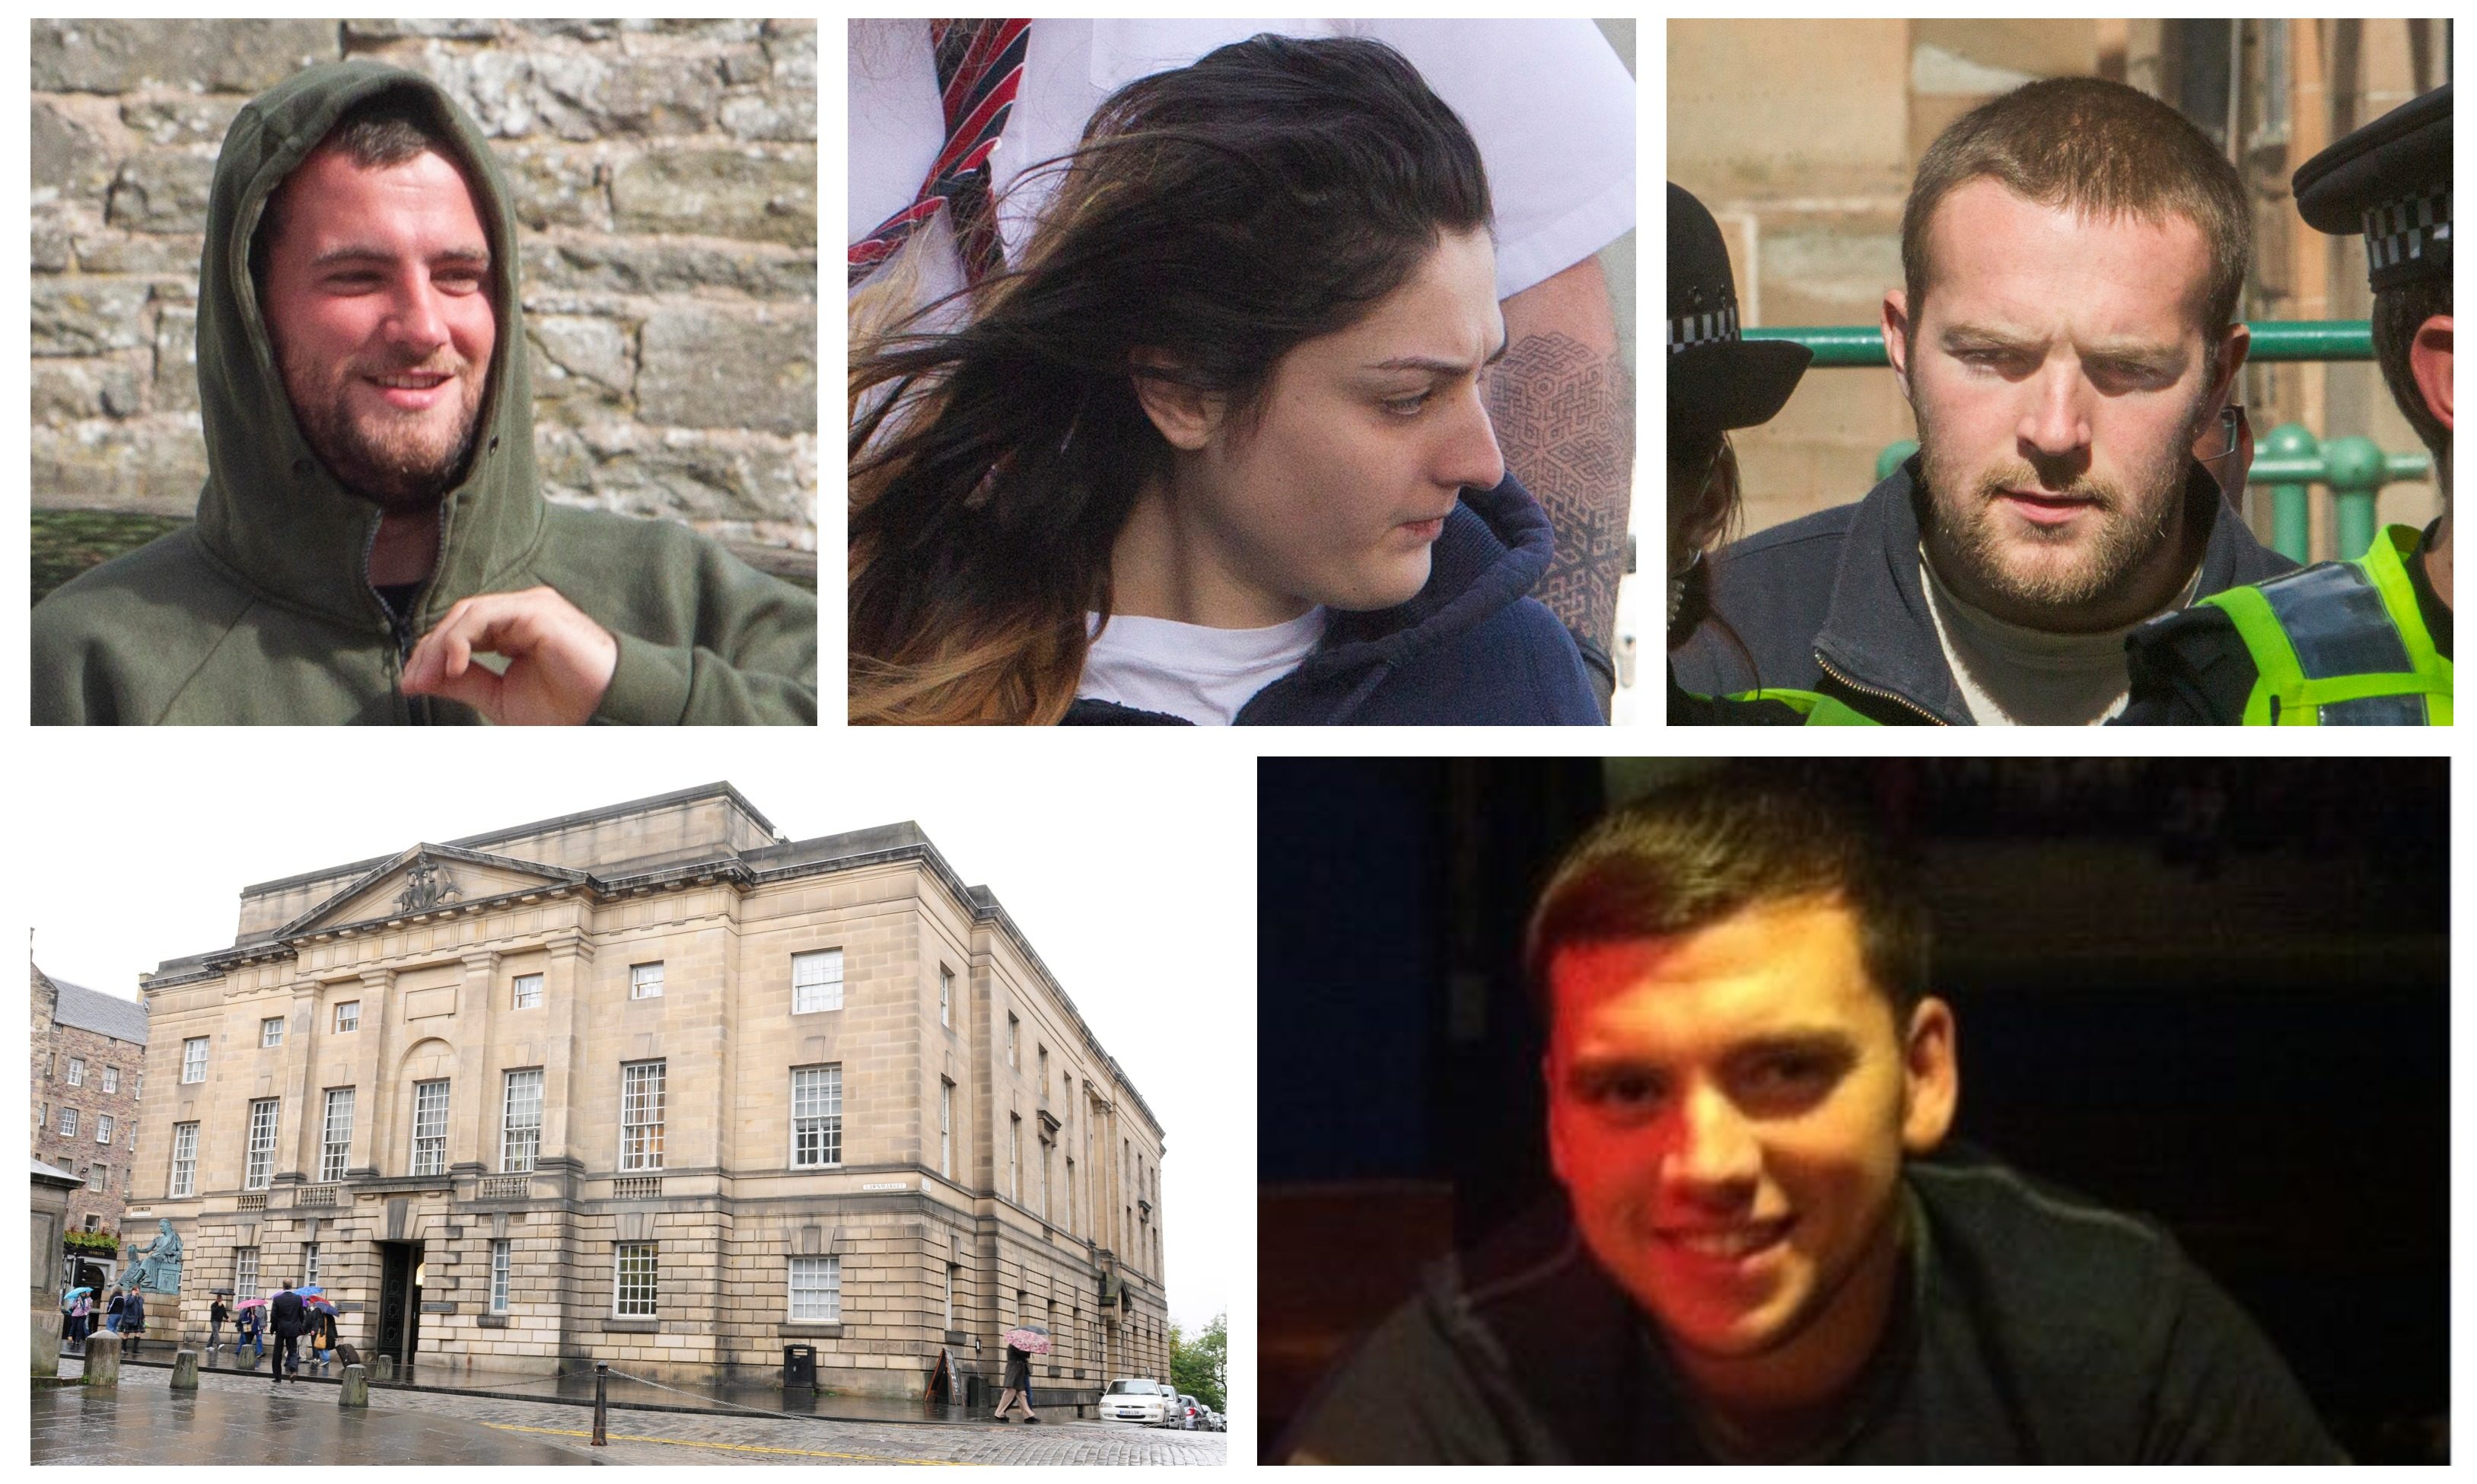 Steven Dickie (top left), Tasmin Glass (top middle) and Callum Davidson (top right) were all convicted of killing Steven Donaldson (bottom right).